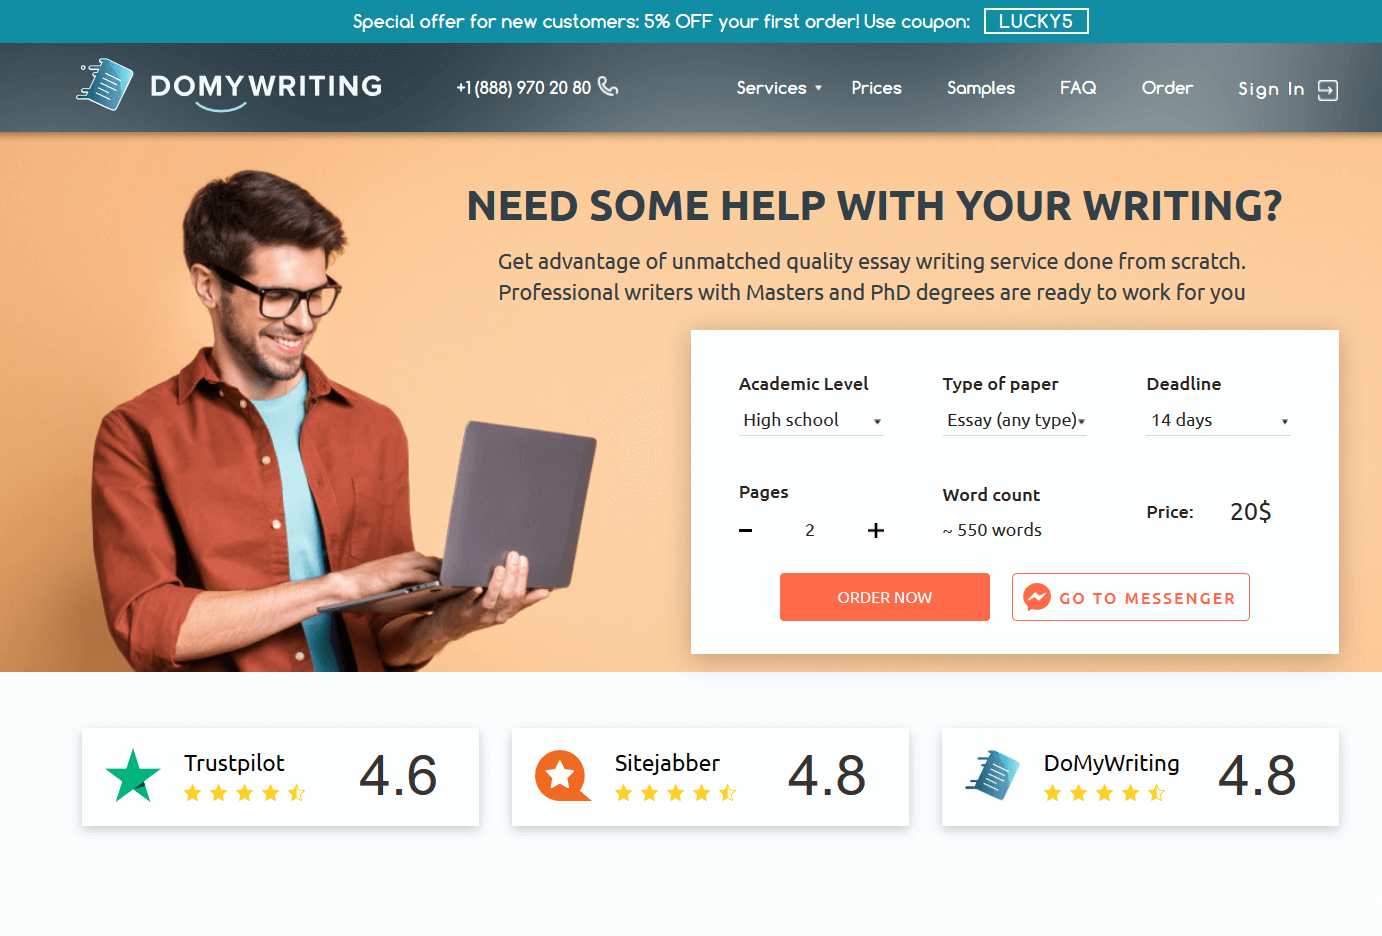 domywriting.com overview